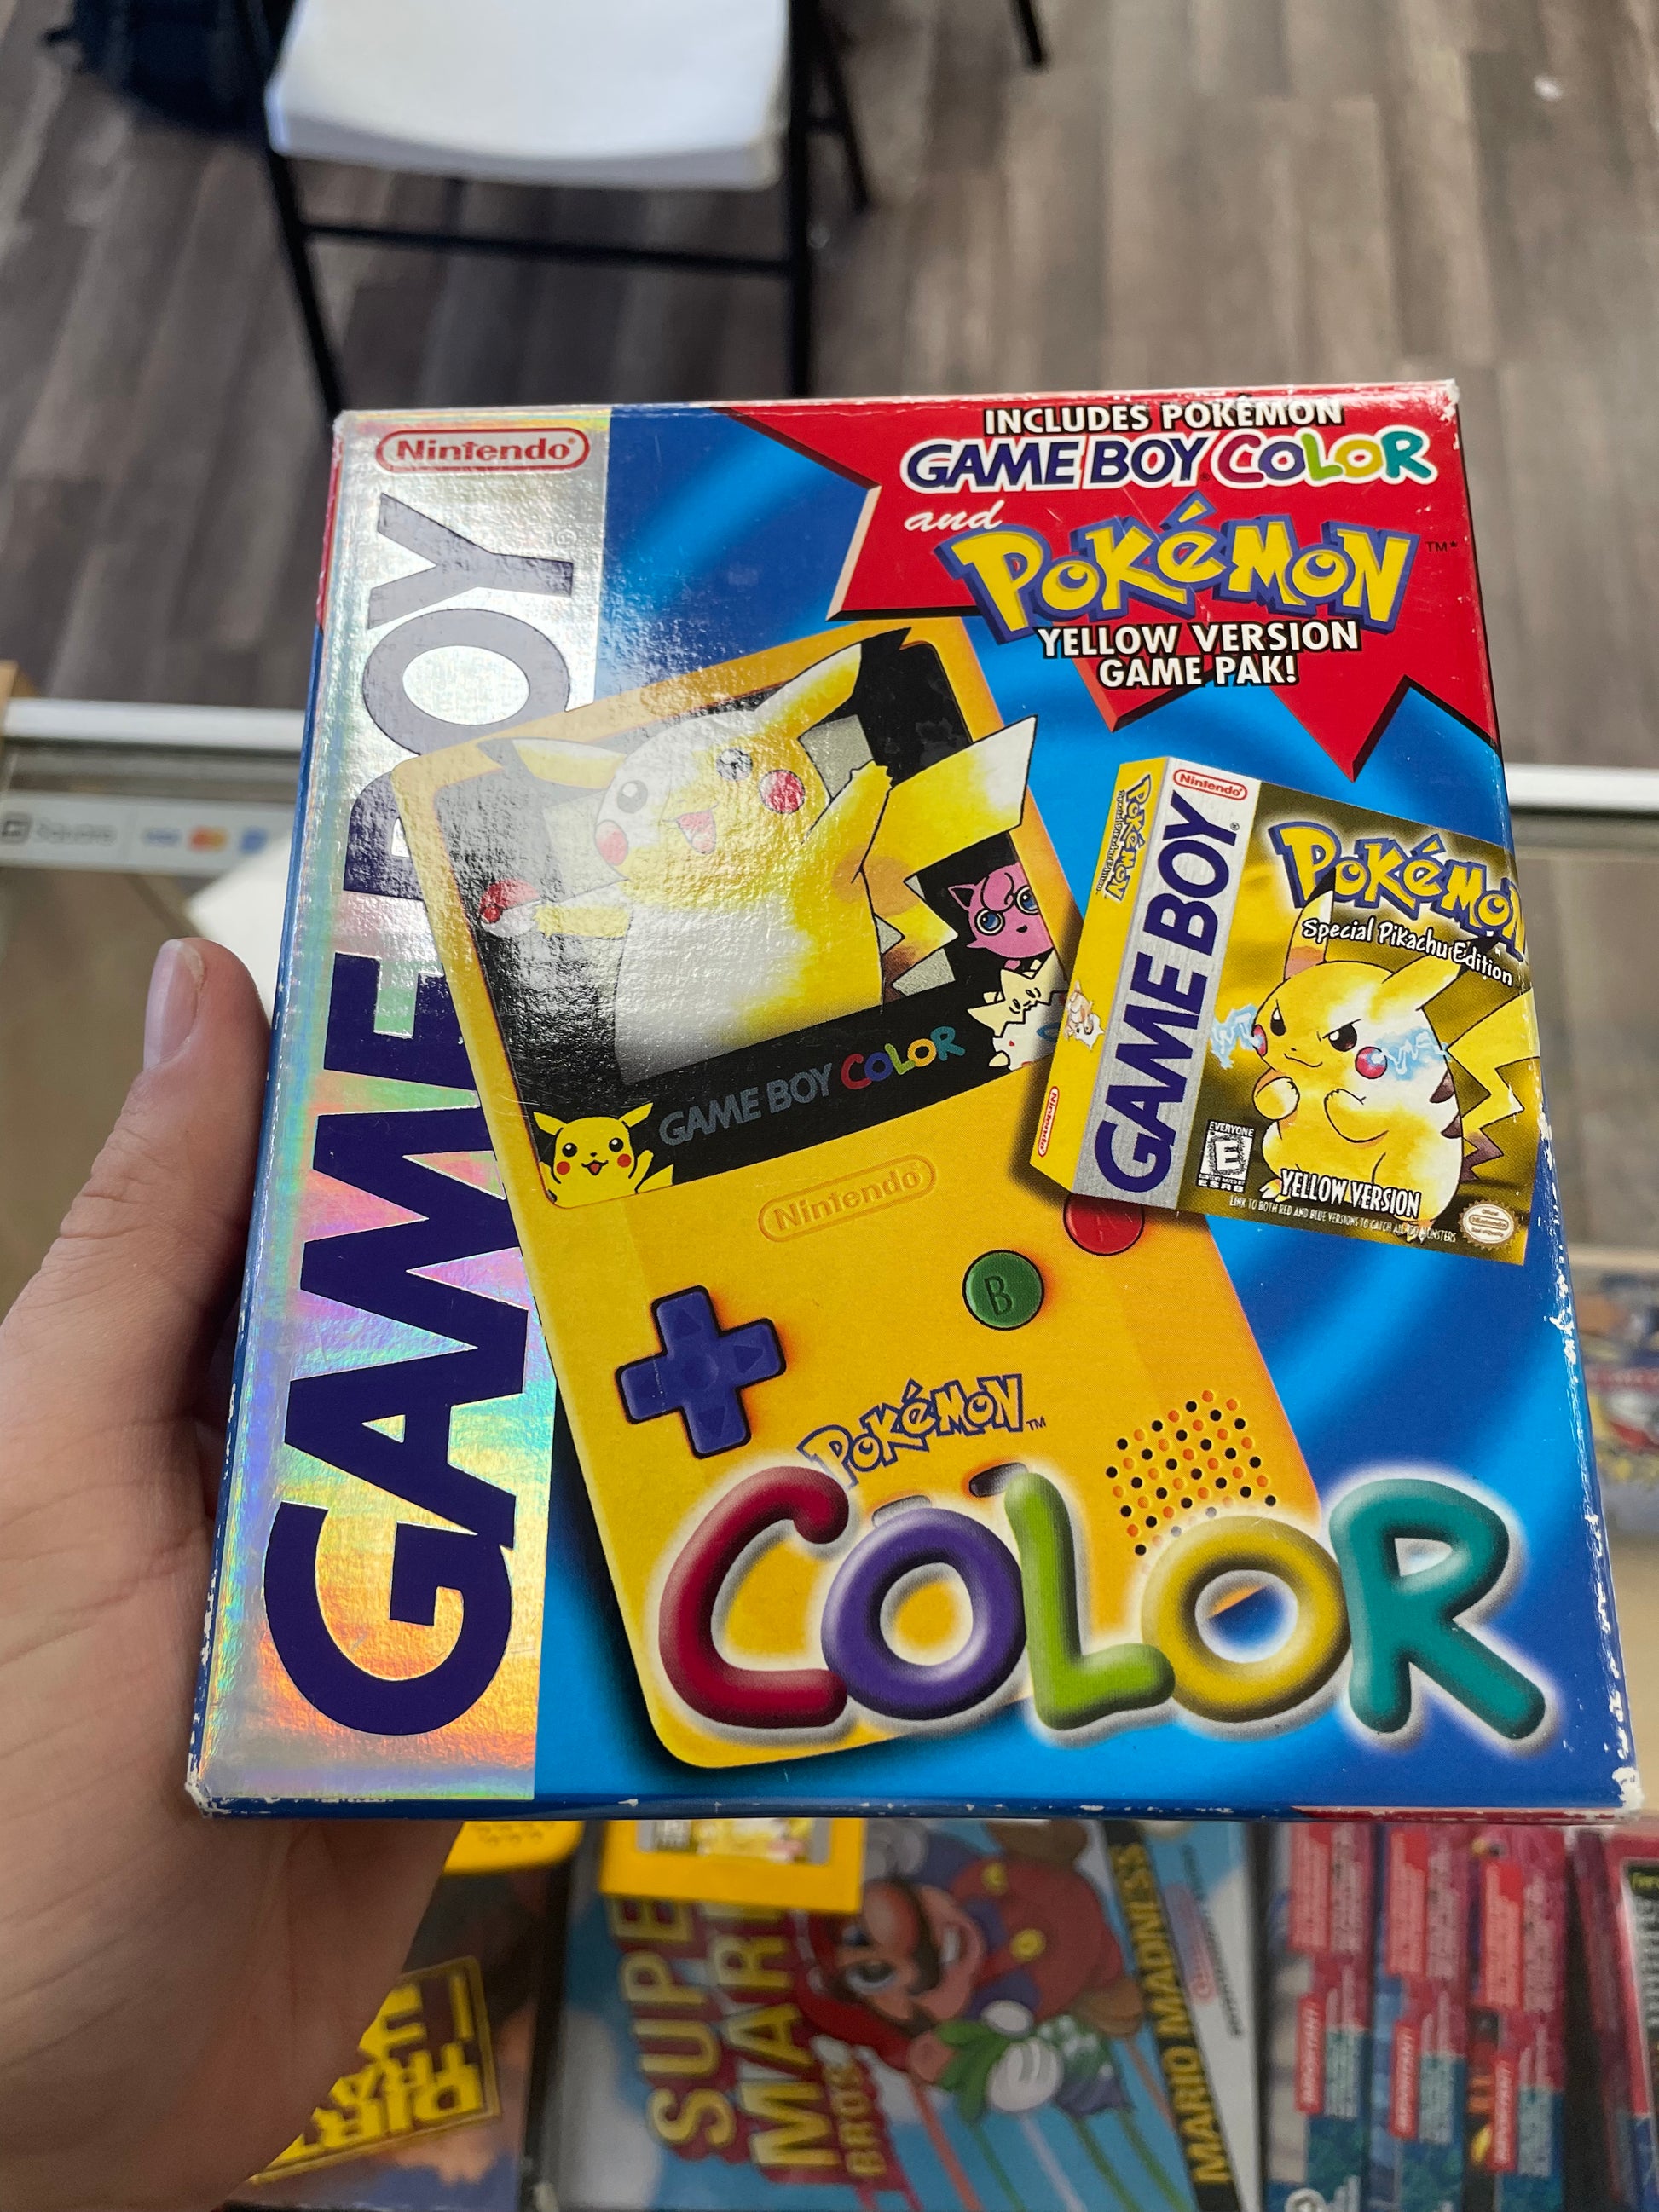 Gameboy Color - Limited Pokemon Edition - Yellow for Game Boy